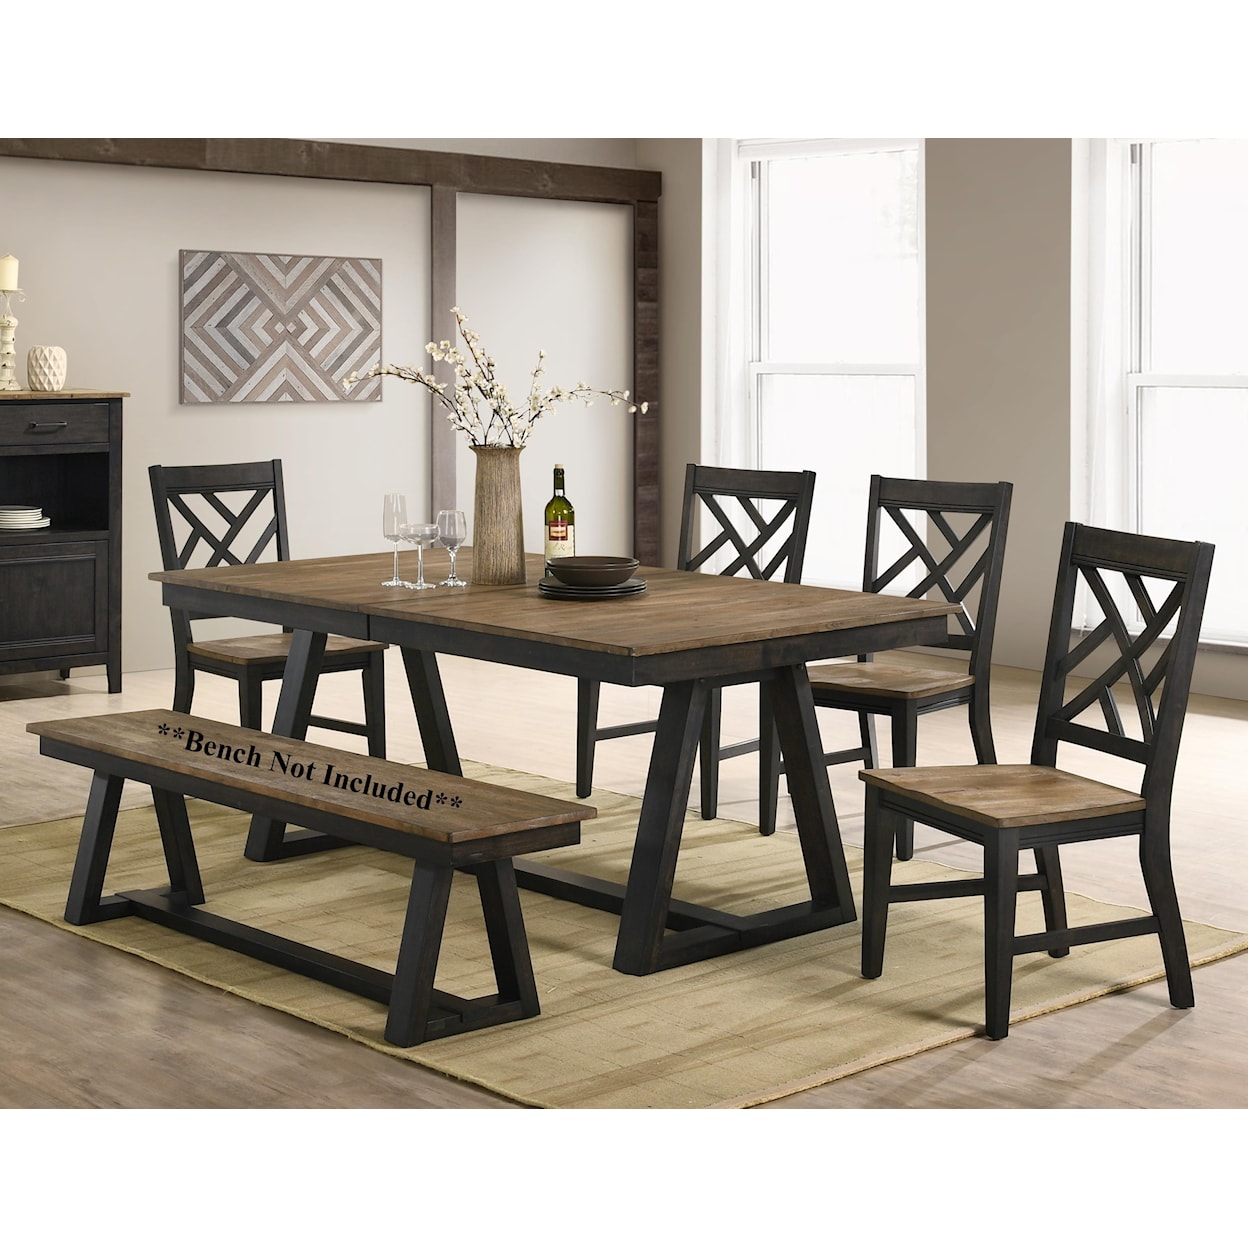 Intercon Harper 5-Piece Table and Chair Set